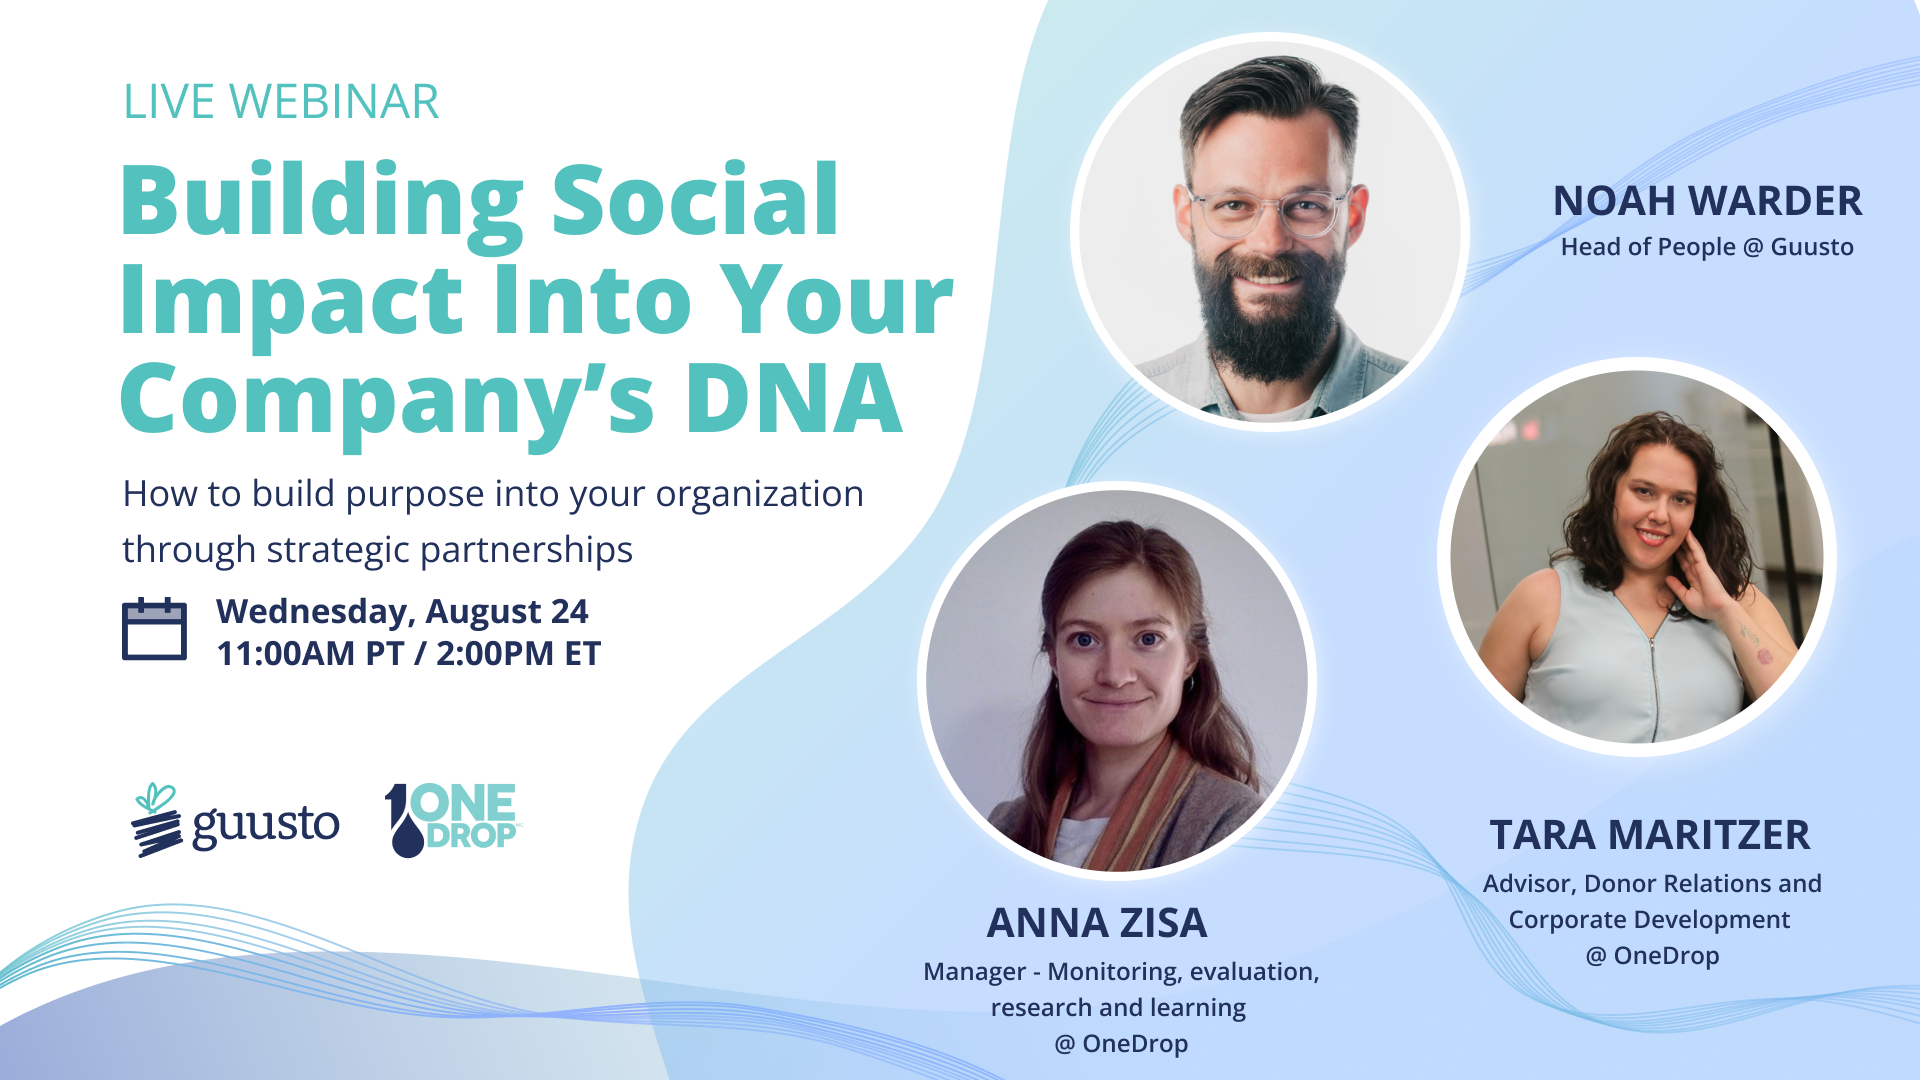 Building Social Impact into Your Company’s DNA